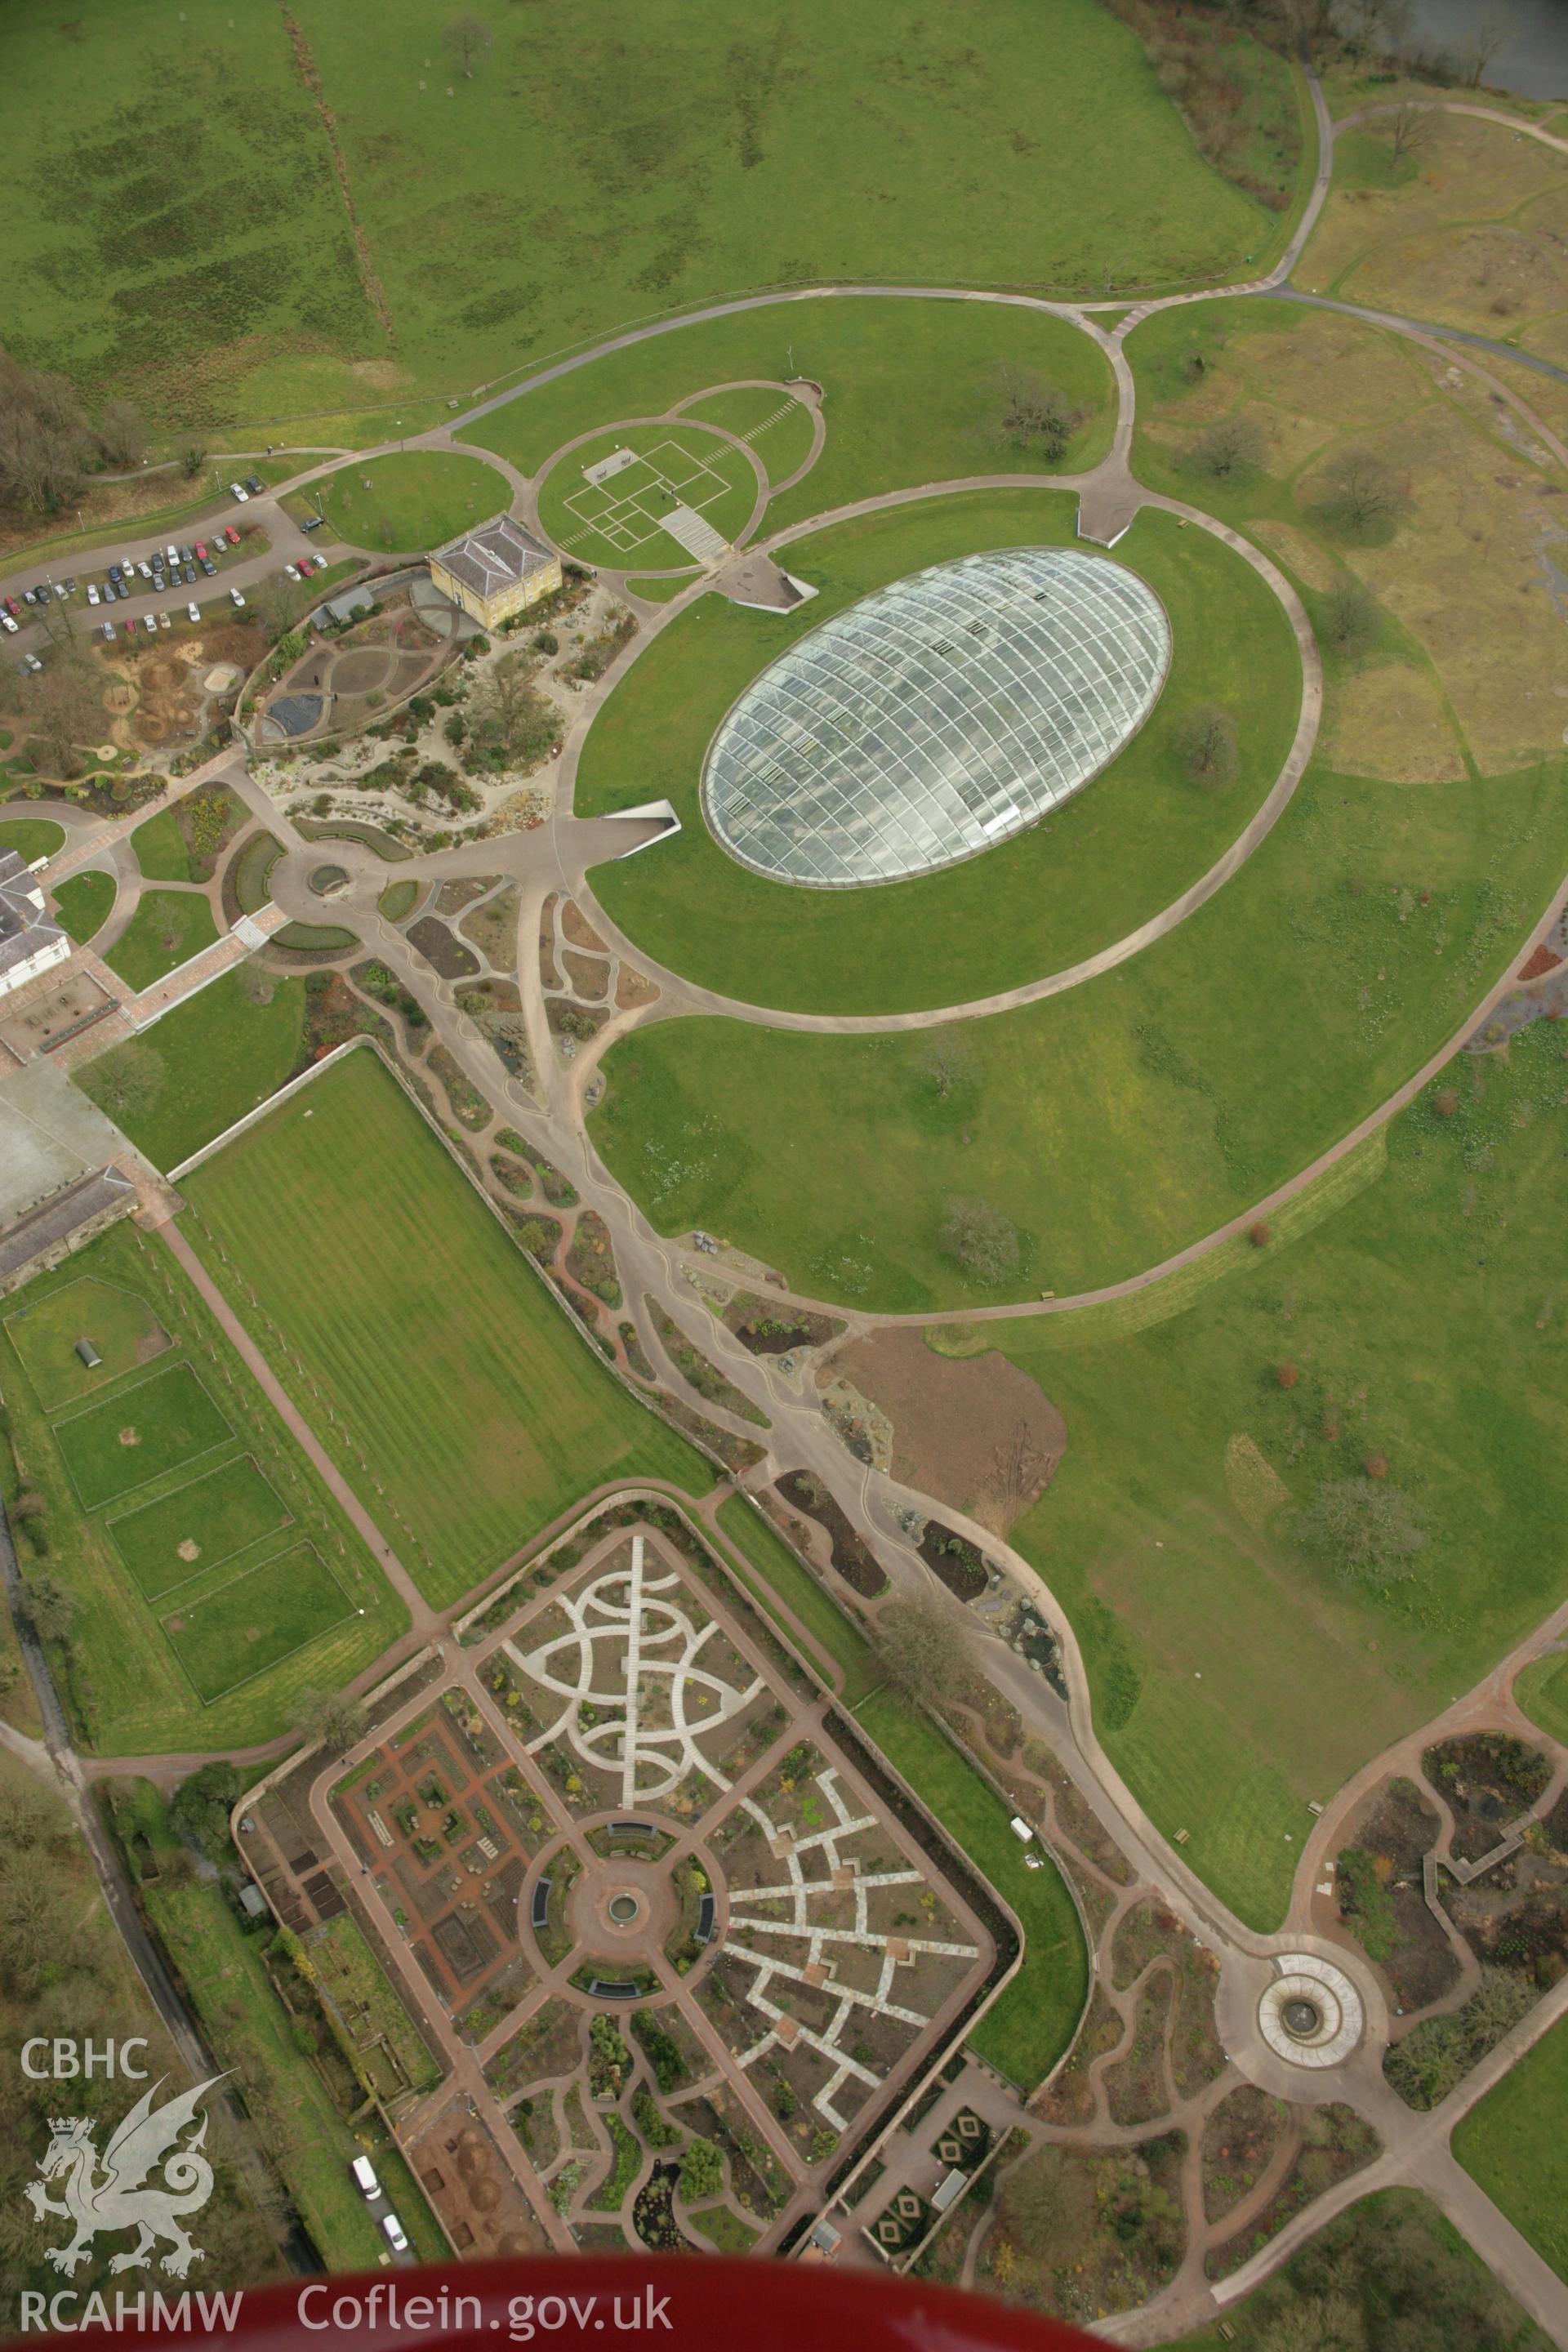 RCAHMW colour oblique aerial photograph of Middleton Hall Park, now the National Botanic Garden of Wales. Taken on 16 March 2007 by Toby Driver